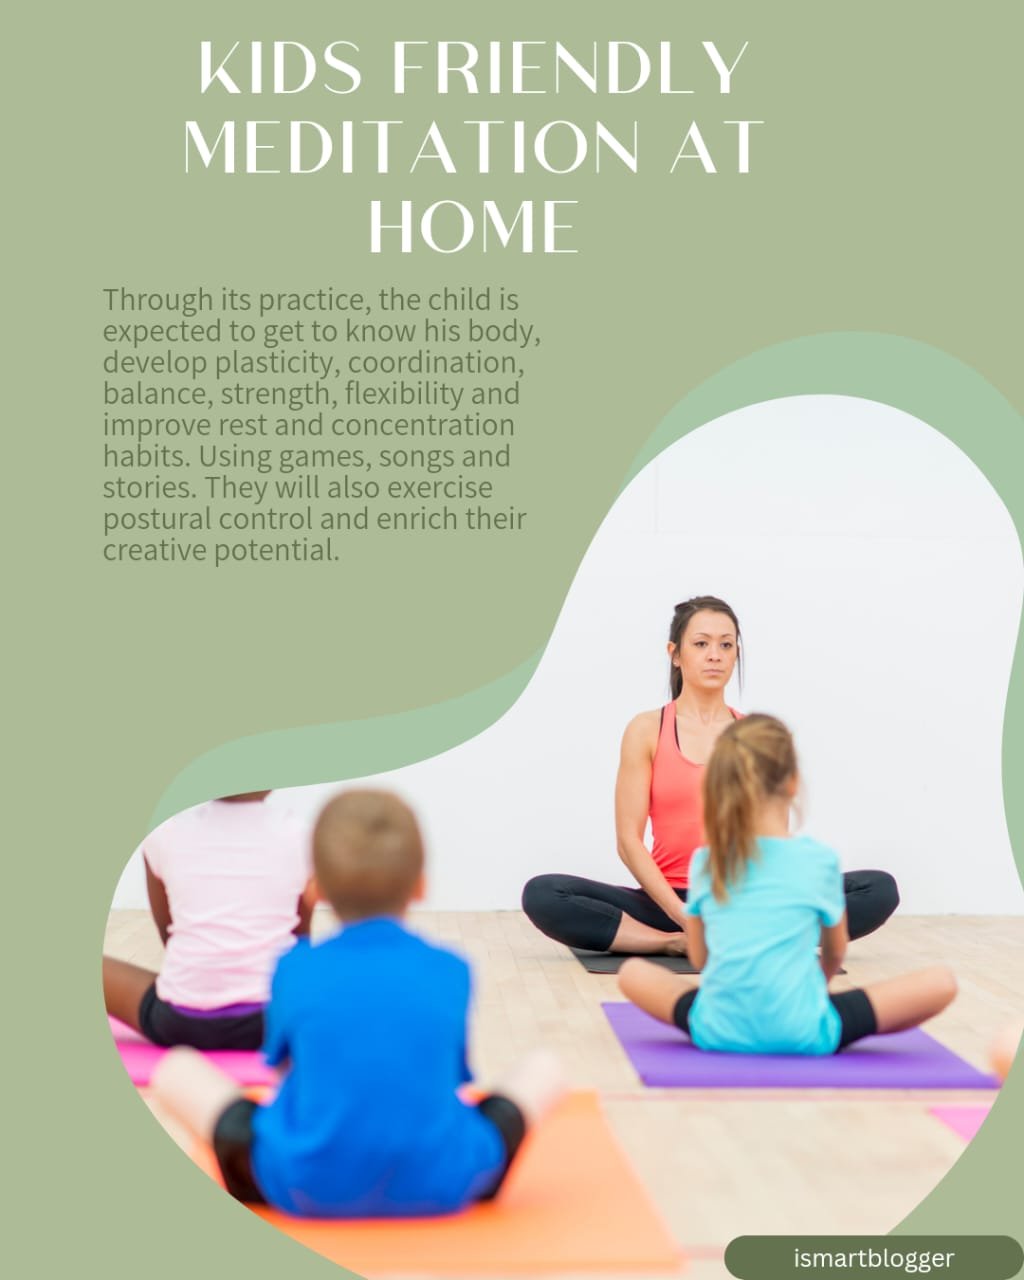 How To Create A Kid-Friendly Meditation Space At Home